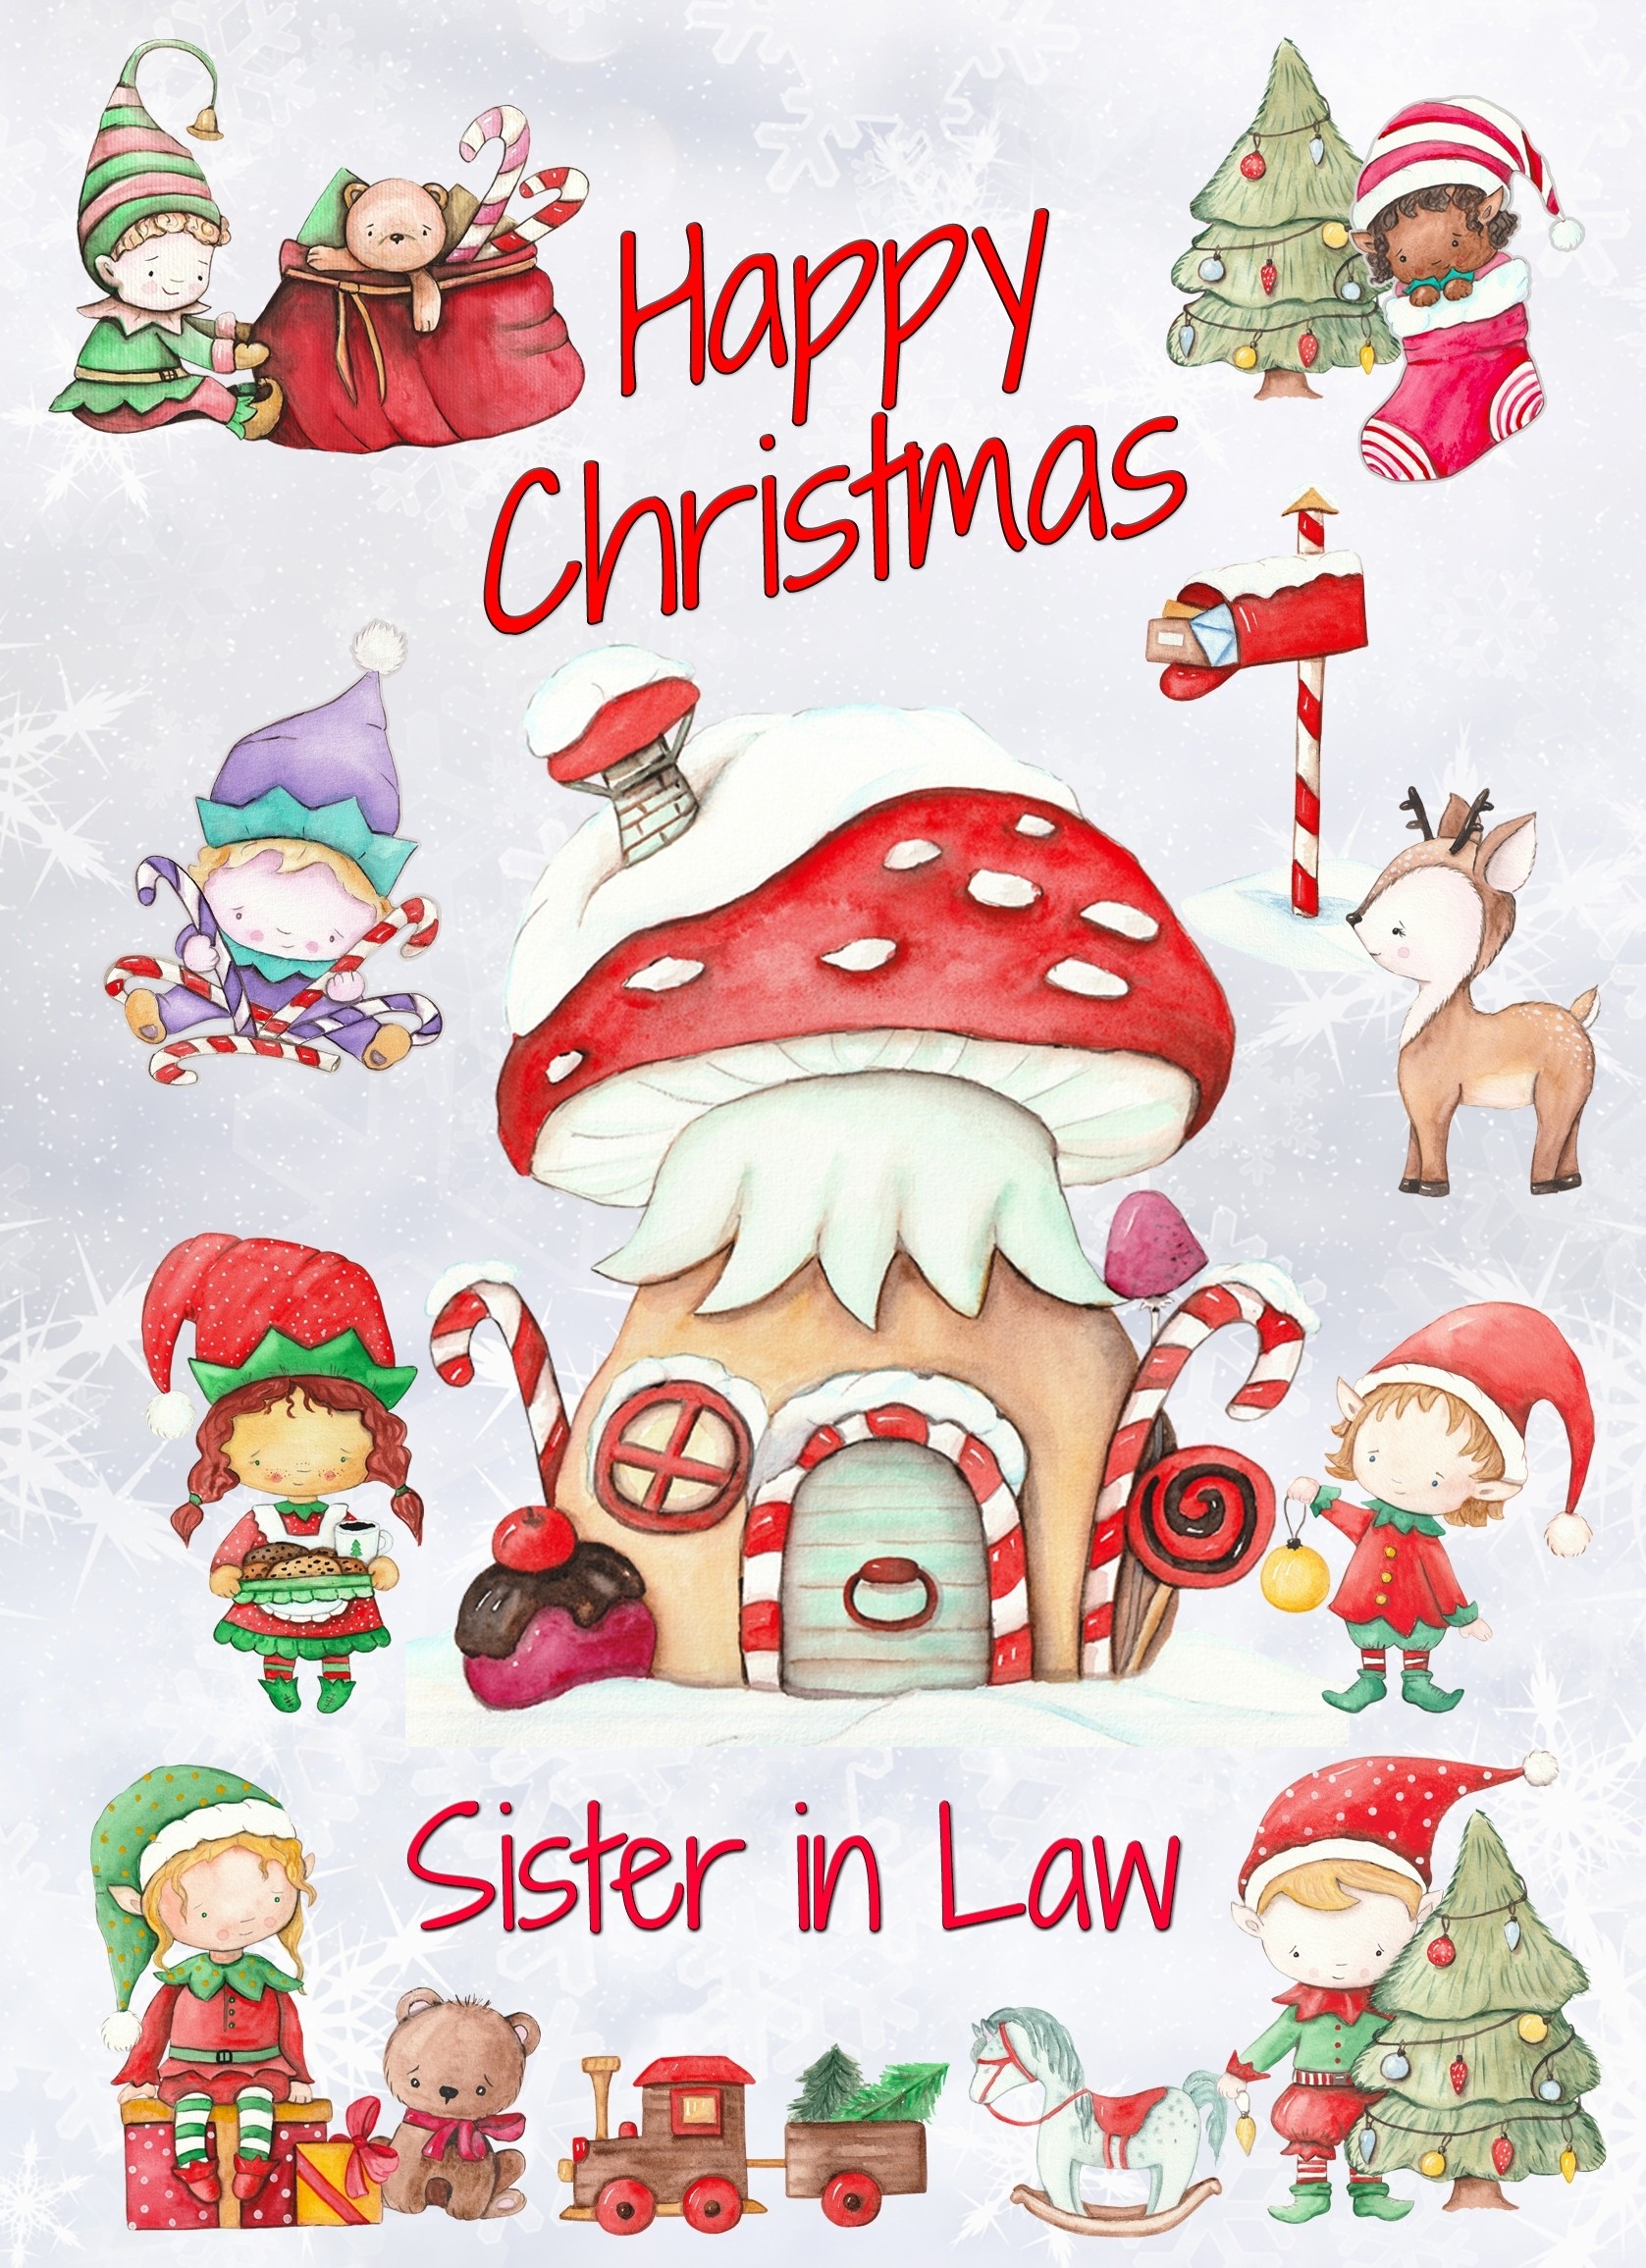 Christmas Card For Sister in Law (Elf, White)